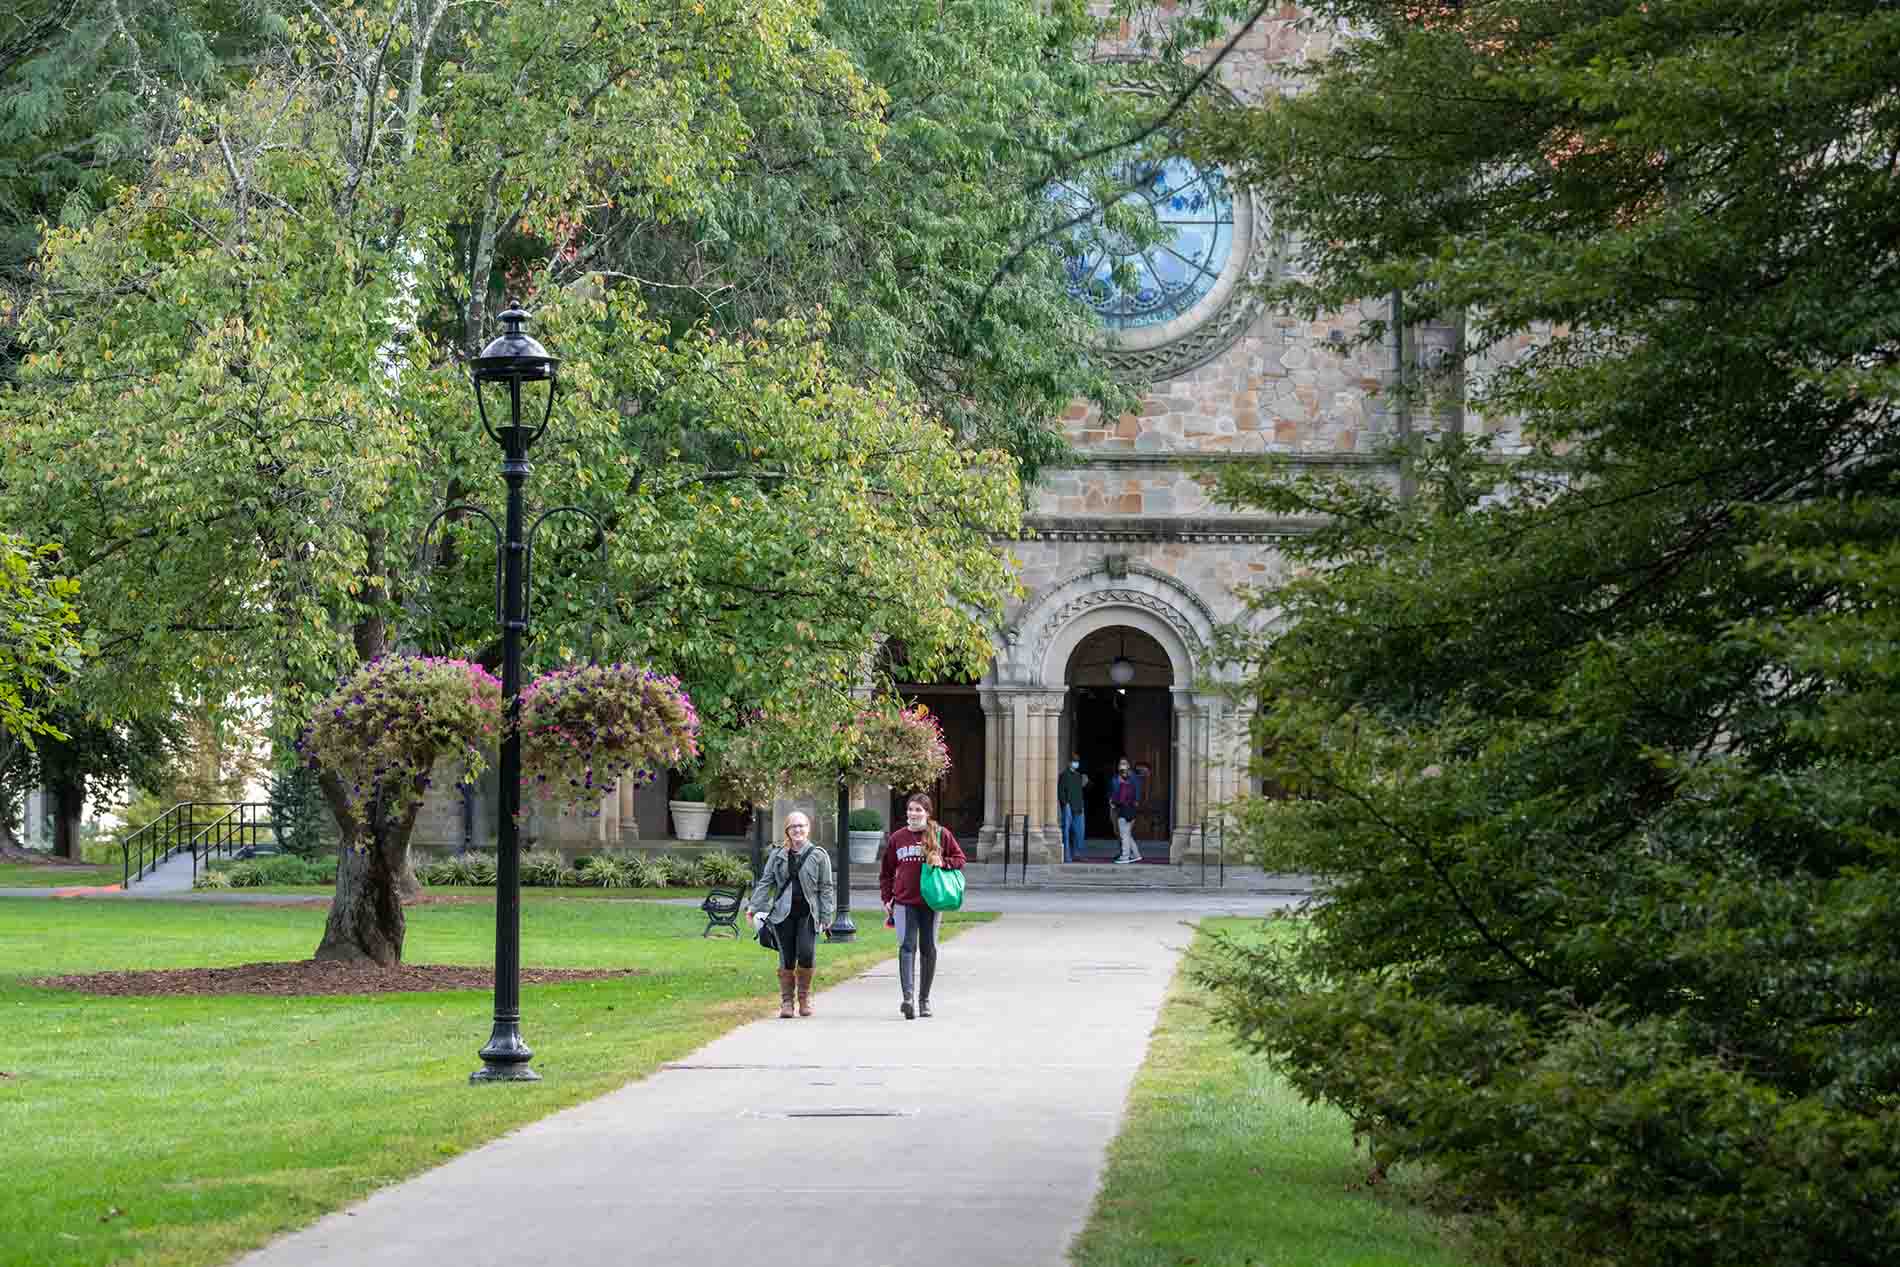 A photo of a straight walkway leading away from the chapel, a large, stone building with arches and a big round window. There are trees with green leaves on both sides of the walkway. It’s a sunny day. Two people, seen from a distance, are walking towards the viewer.